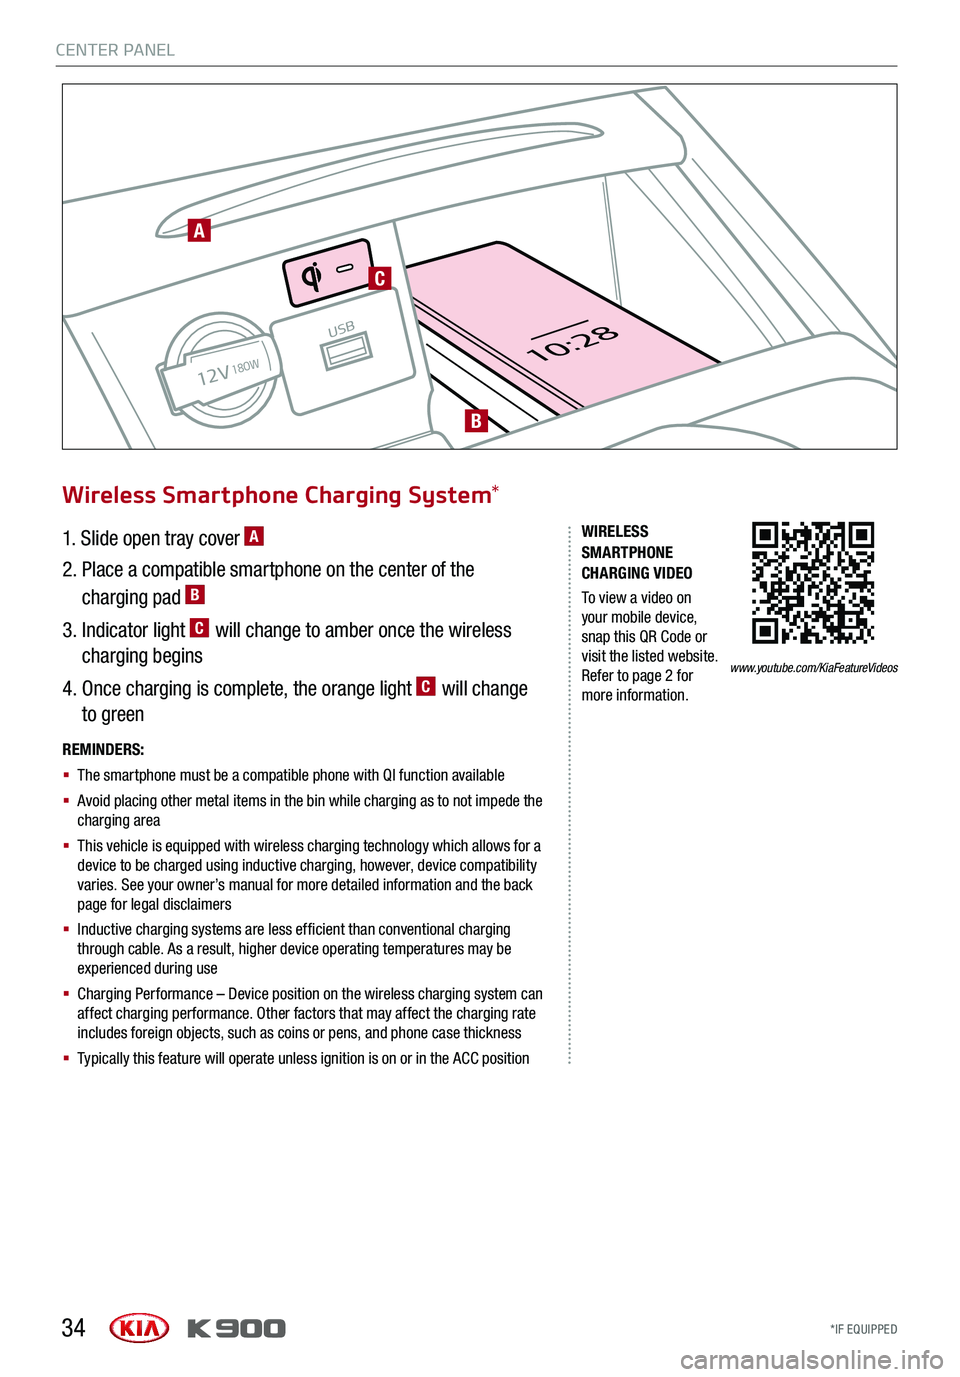 KIA K900 2019  Features and Functions Guide 34
12V
USB
10:2818OW
REMINDERS: 
§   The smartphone must be a compatible phone with QI function available
§   Avoid placing other metal items in the bin while charging as to not impede the charging 